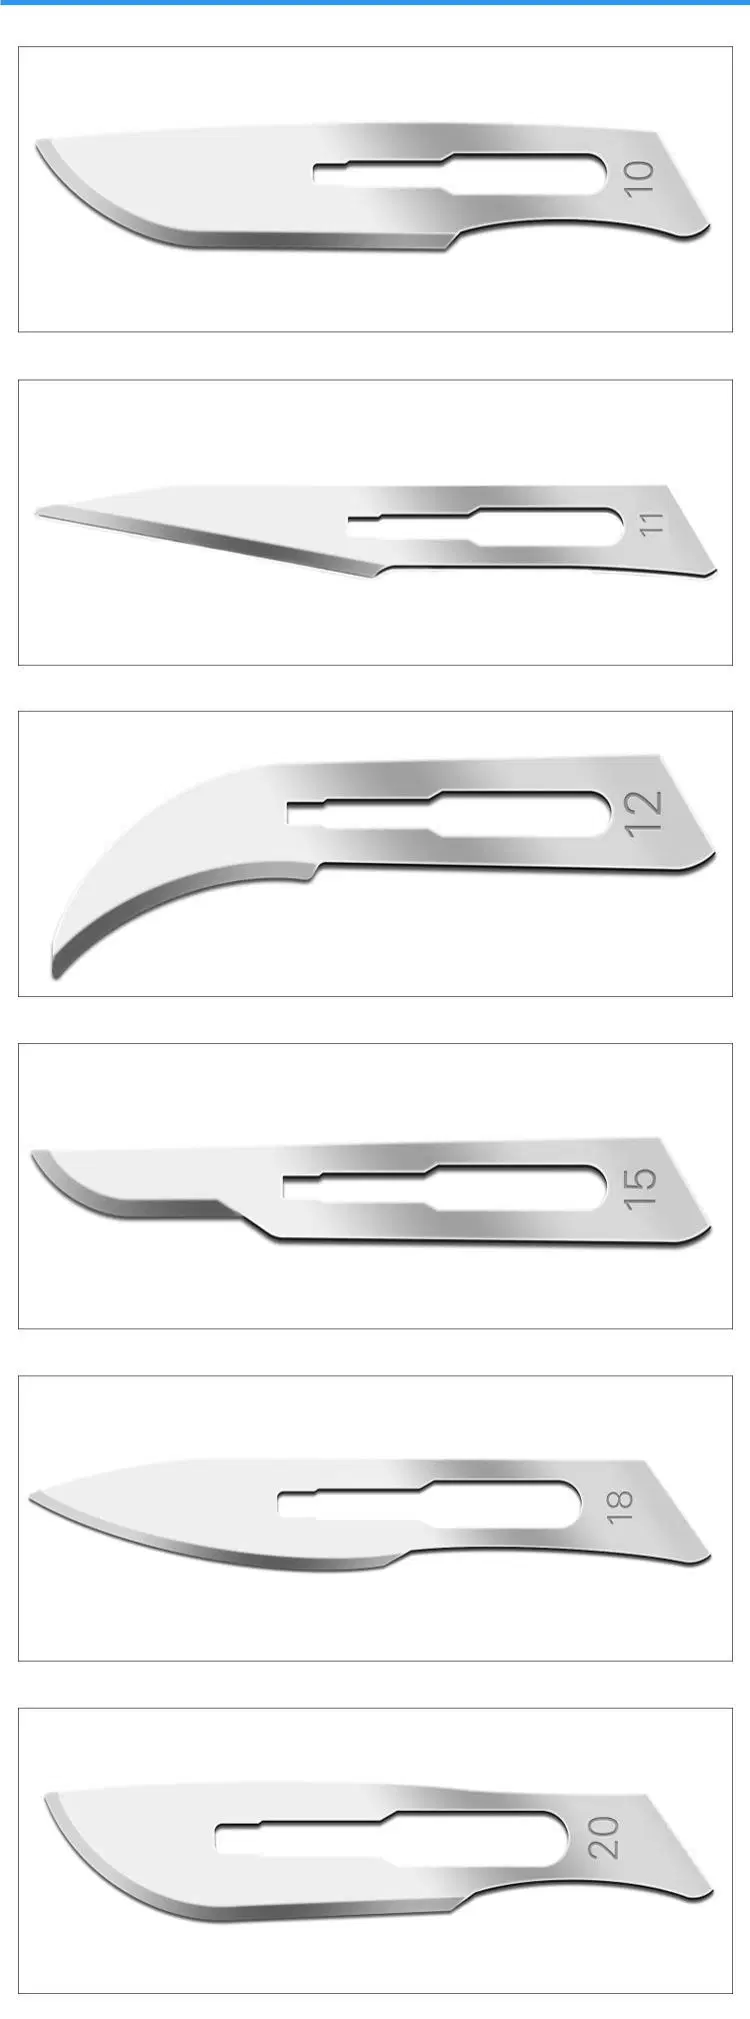 All Sizes Single Use Hospital Surgical Knife Scalpel Blade